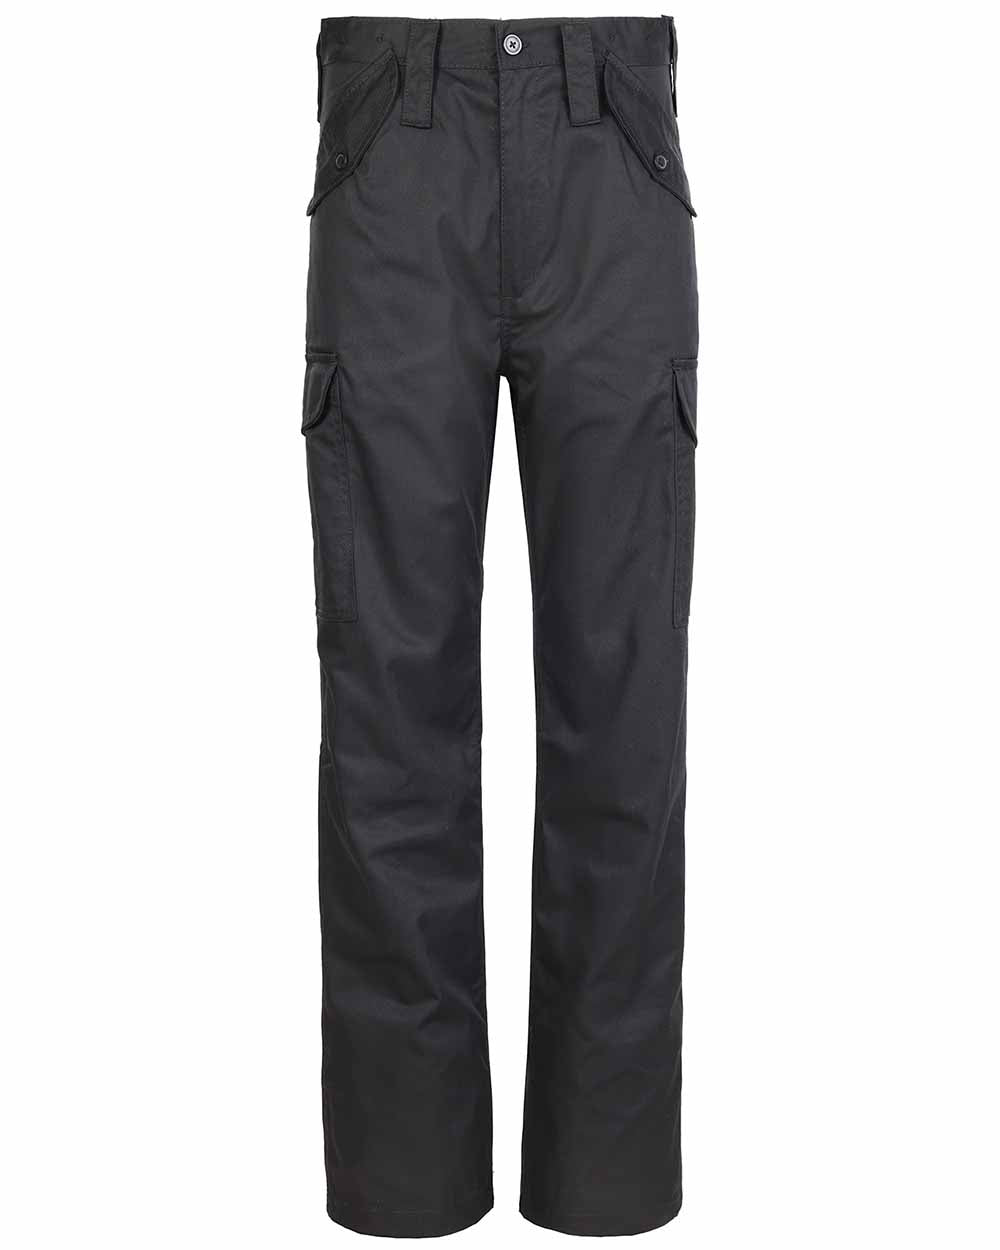 Fort Combat Trousers in Black 